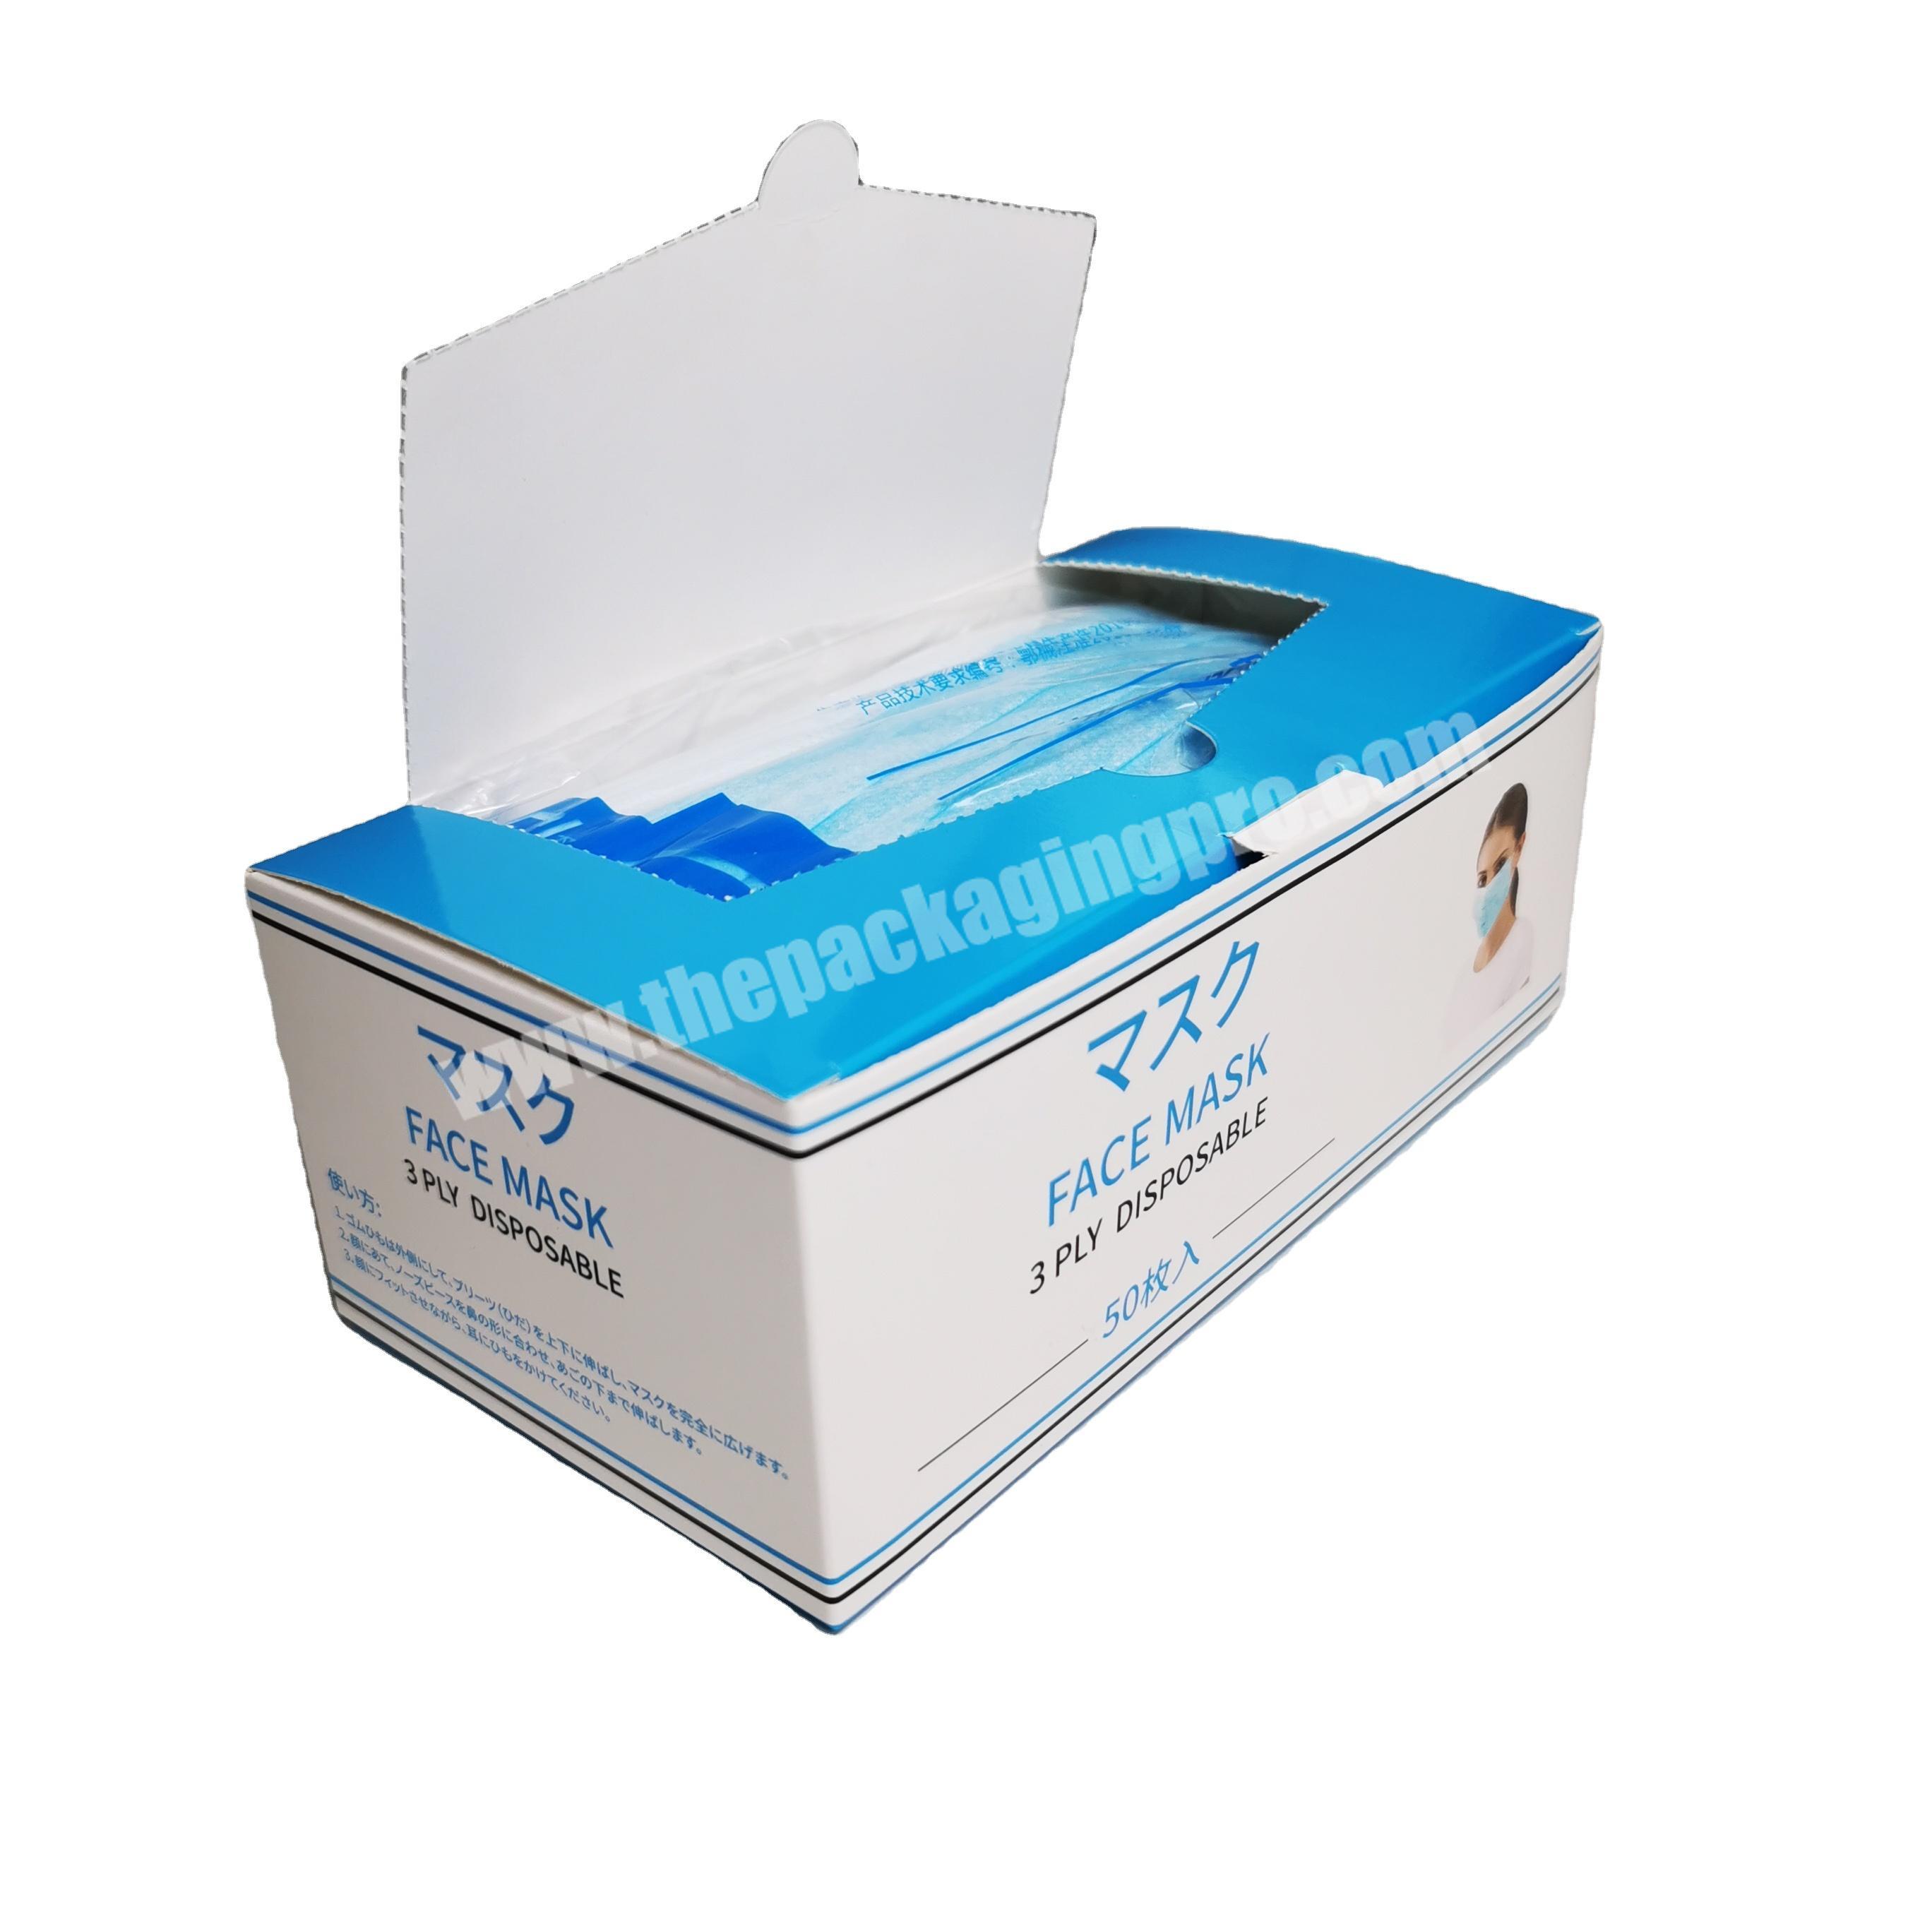 In stock wholesale 3 ply disposable face mask box face mask packaging box printed in Japanese